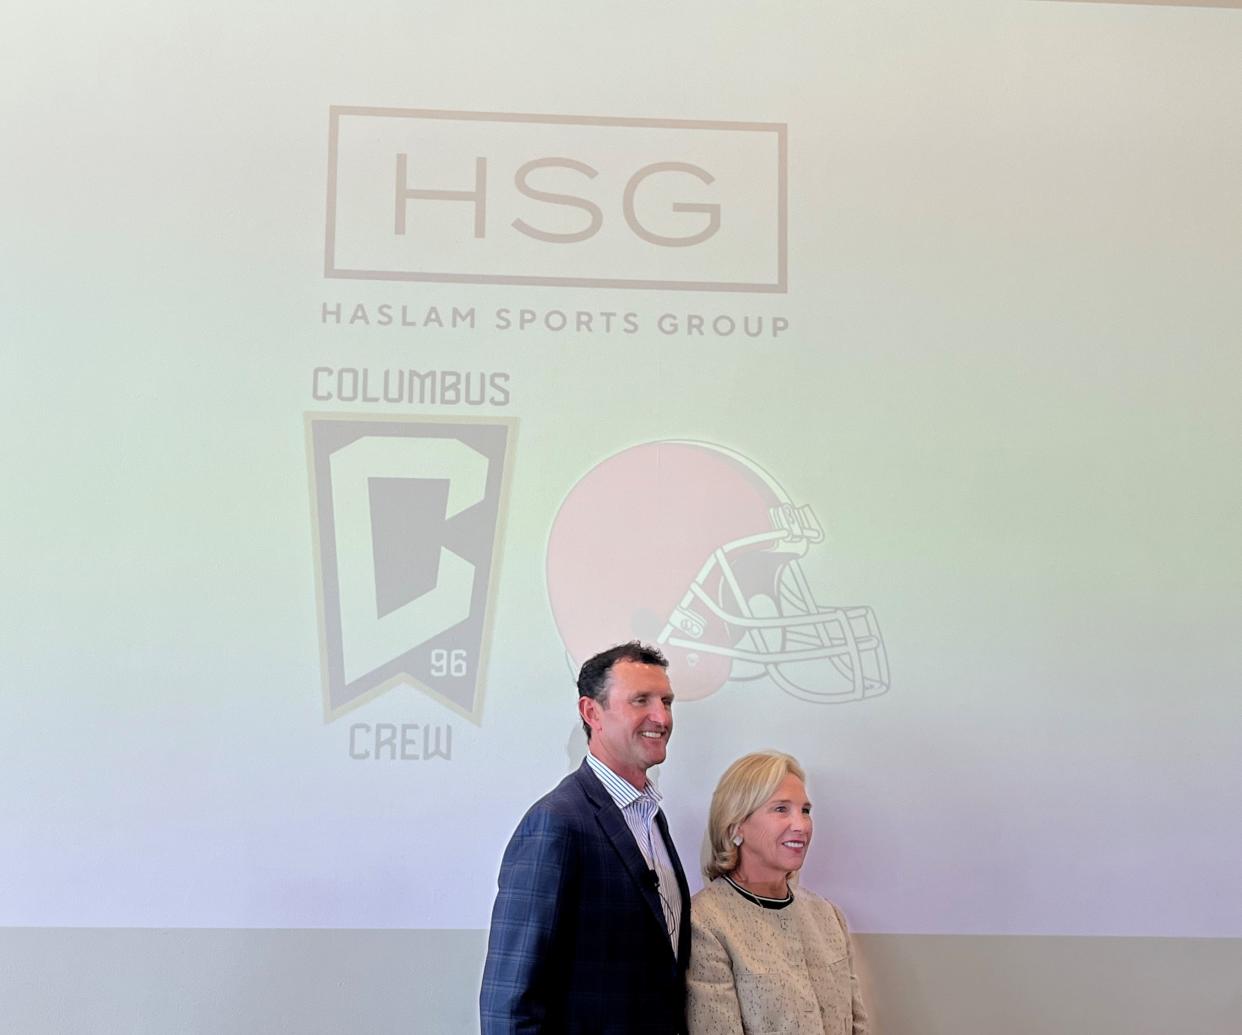 JW Johnson III, executive vice president of the Browns and a partner of the Haslam Sports Group, and Dee Haslam, CEO of Haslam Sports Group, pose after speaking at the Columbus Museum of Art for the Ohio Chamber's annual State of Business Summit on Tuesday.